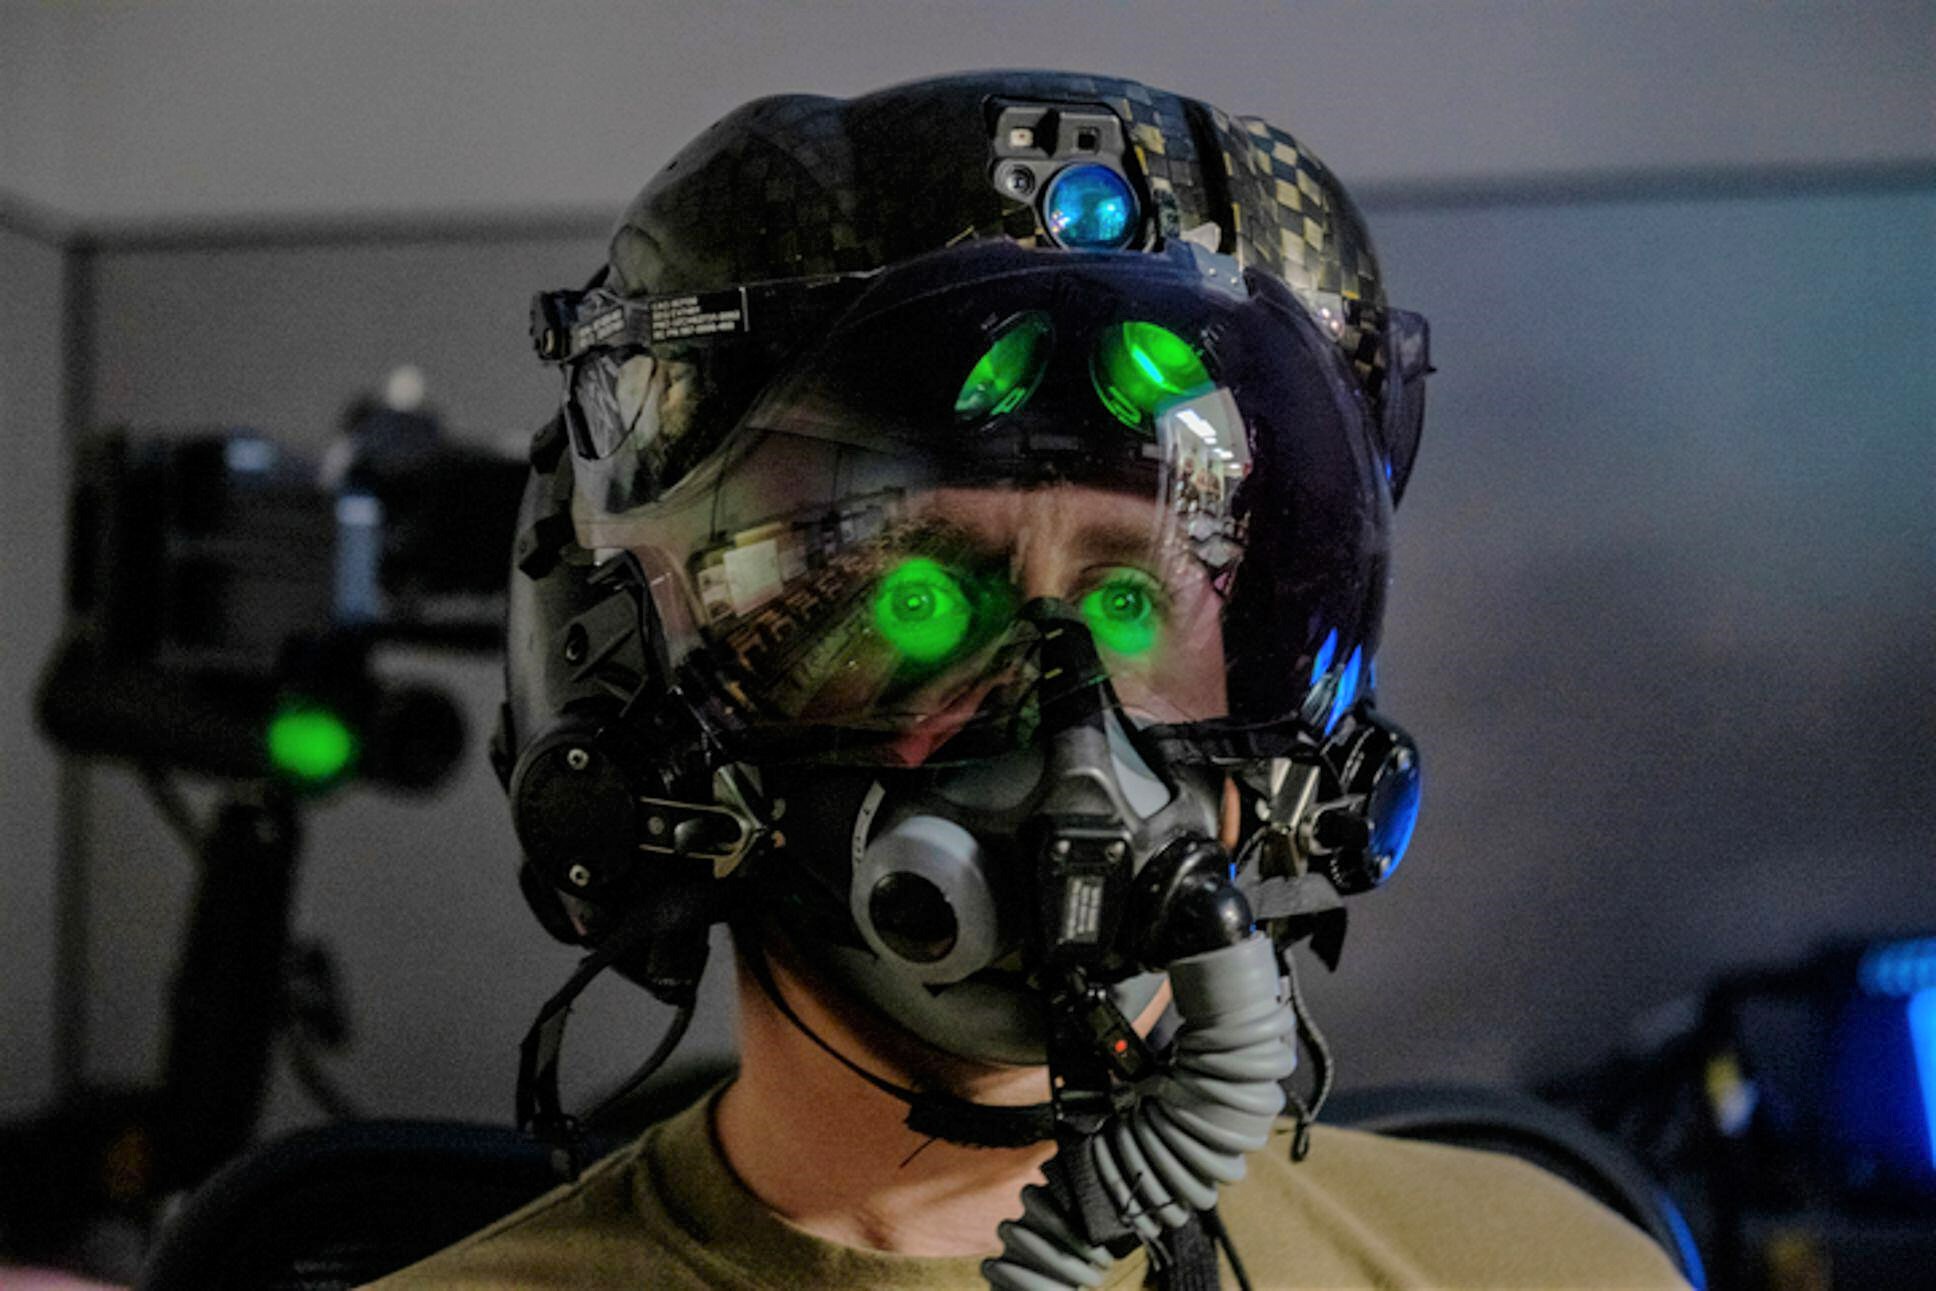 U.S. Air Force Tech. Sgt. Anthony Farnsworth, 419th Operations Support Squadron, poses for a photo to demonstrate the F-35 Generation III Helmet-Mounted Display at Hill Air Force Base, Utah, on July 10, 2021. The display provides the pilot critical inform